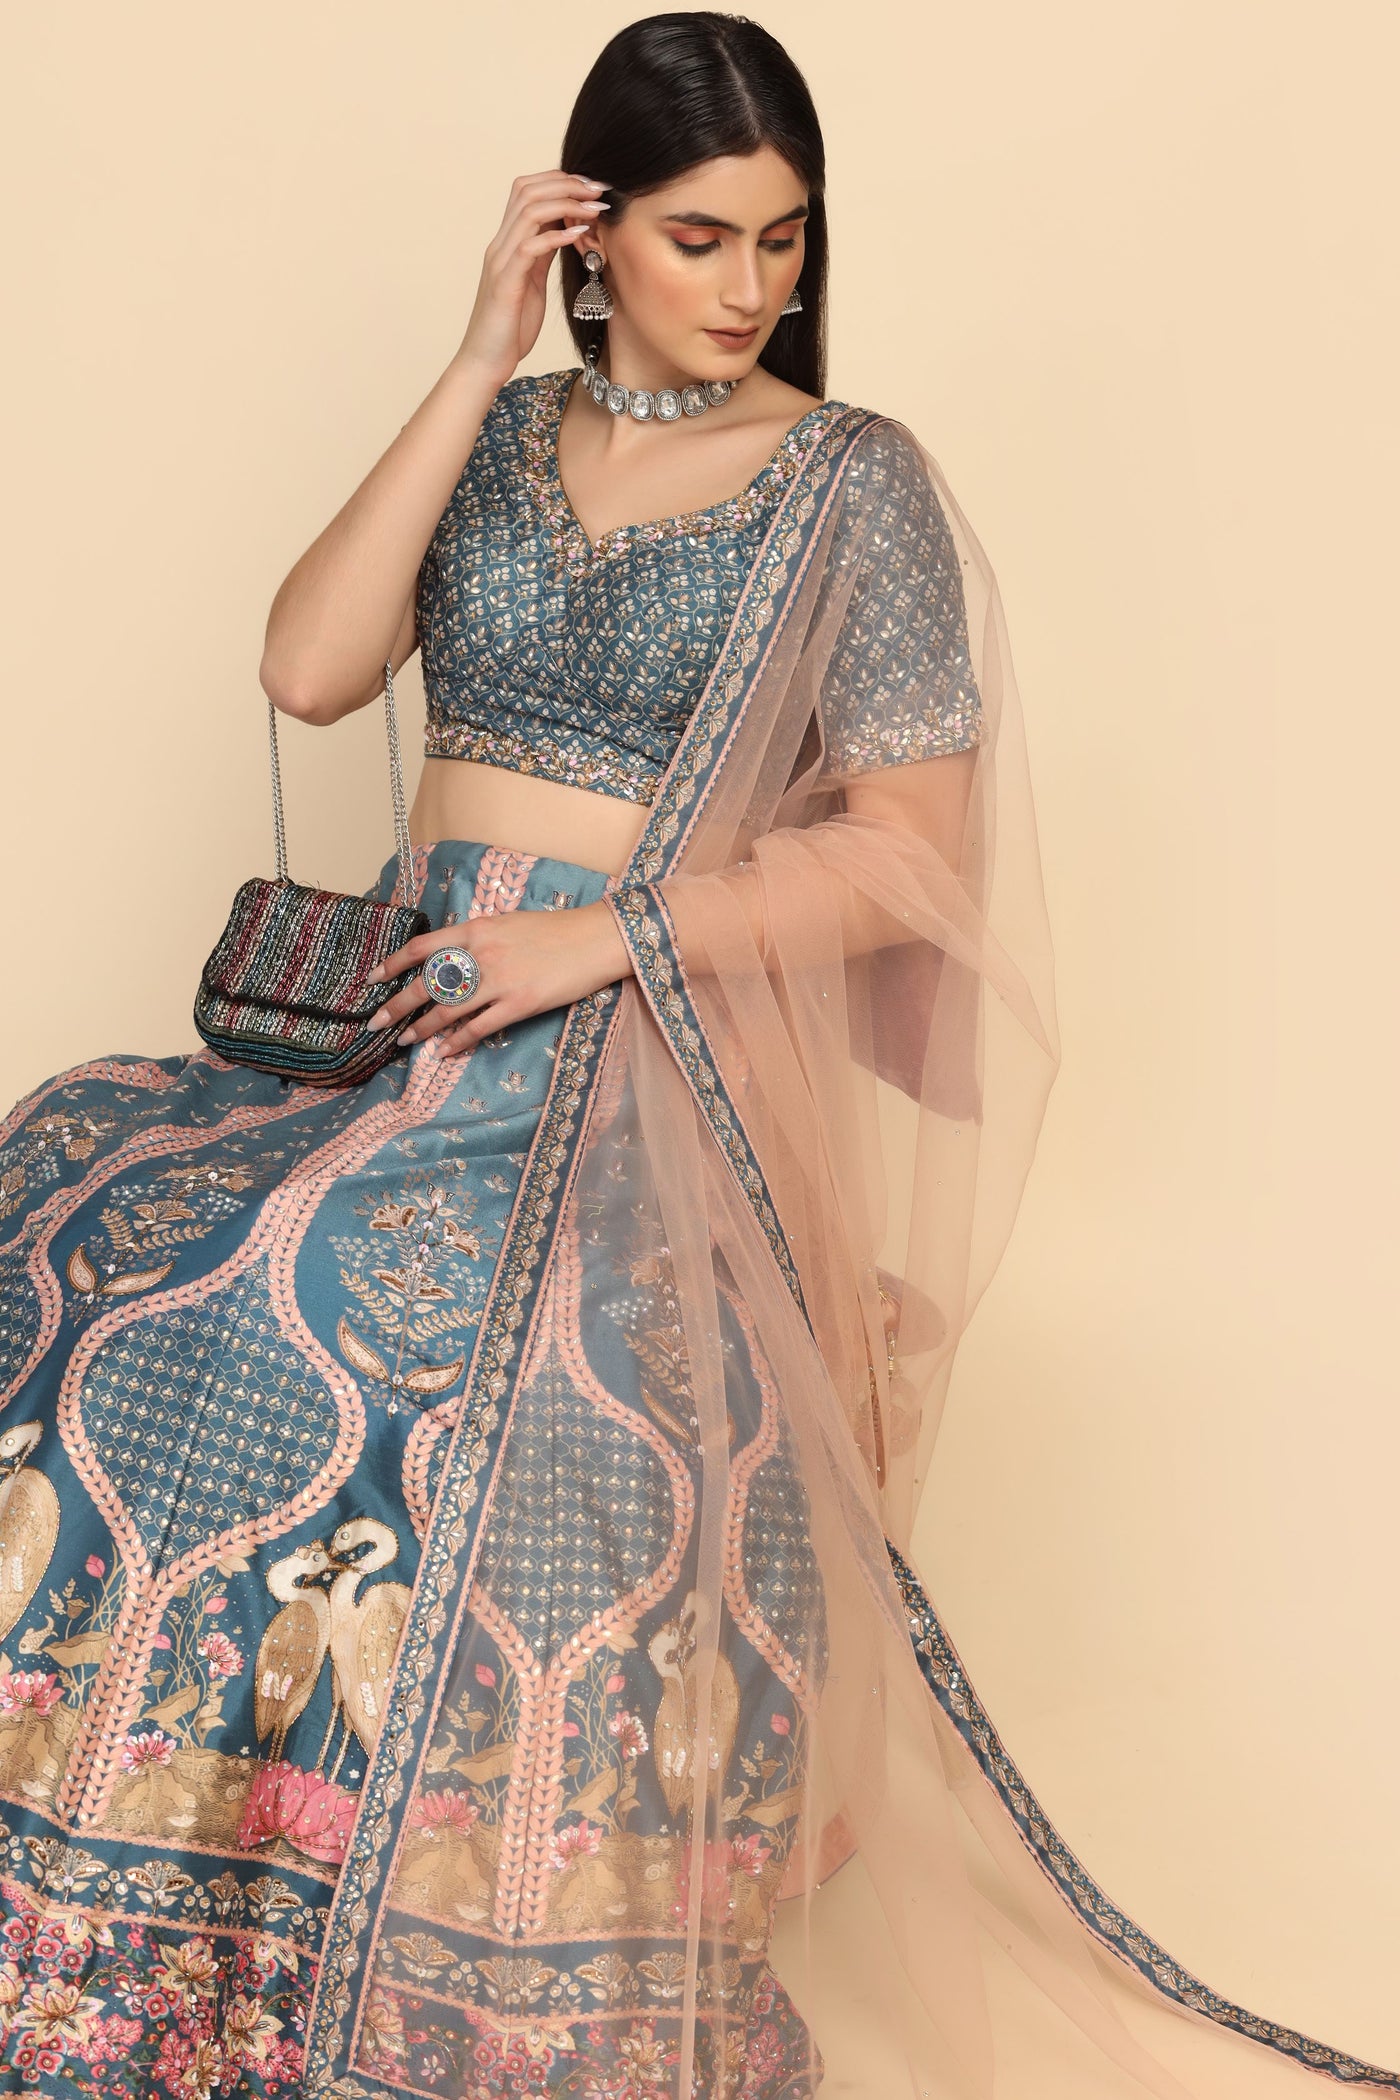 Classy Blue & pink color floral motif embroidered Lehenga